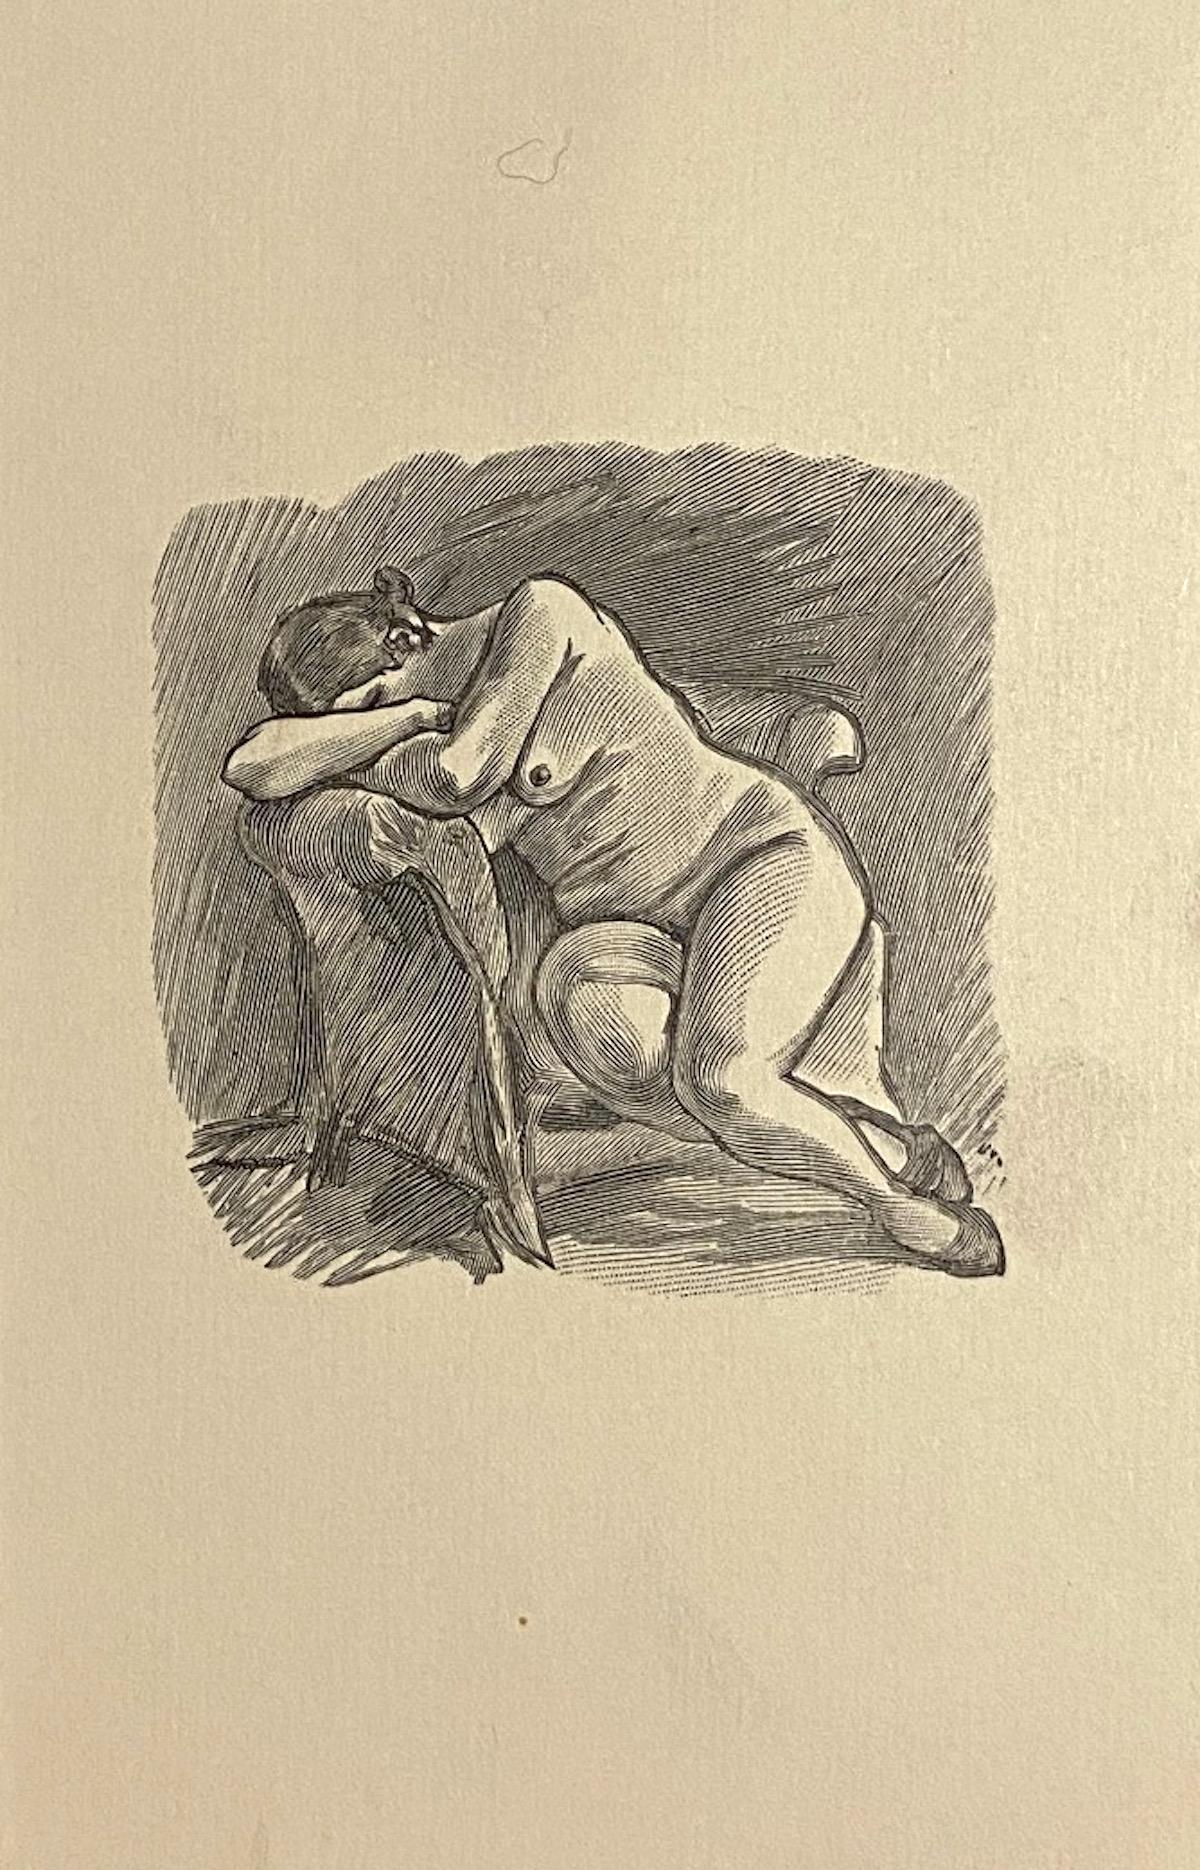 Nude of Woman is an original modern artwork realized the 1950s by the Italian artist Mino Maccari (Siena, 1898 - Rome, 1989).

Original zincography on Ivory paper. Image Dimensions: 16 x 10 cm

Excellent conditions.

This  artwork is fresh and the